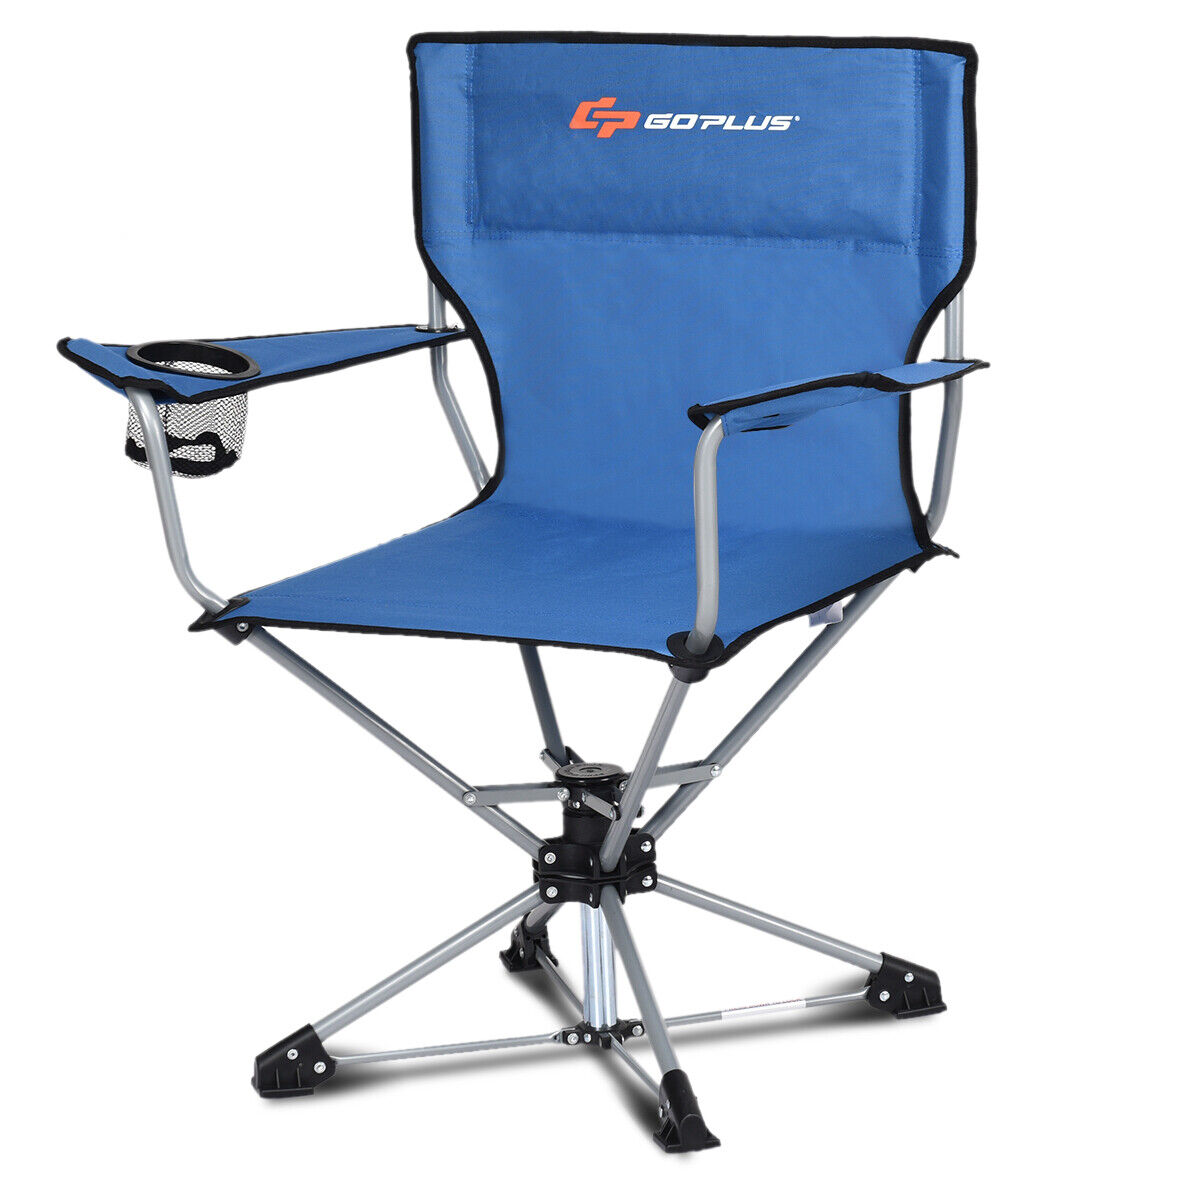 Swivel Camping Chair Collapsible Outdoor Folding Design w/Cup